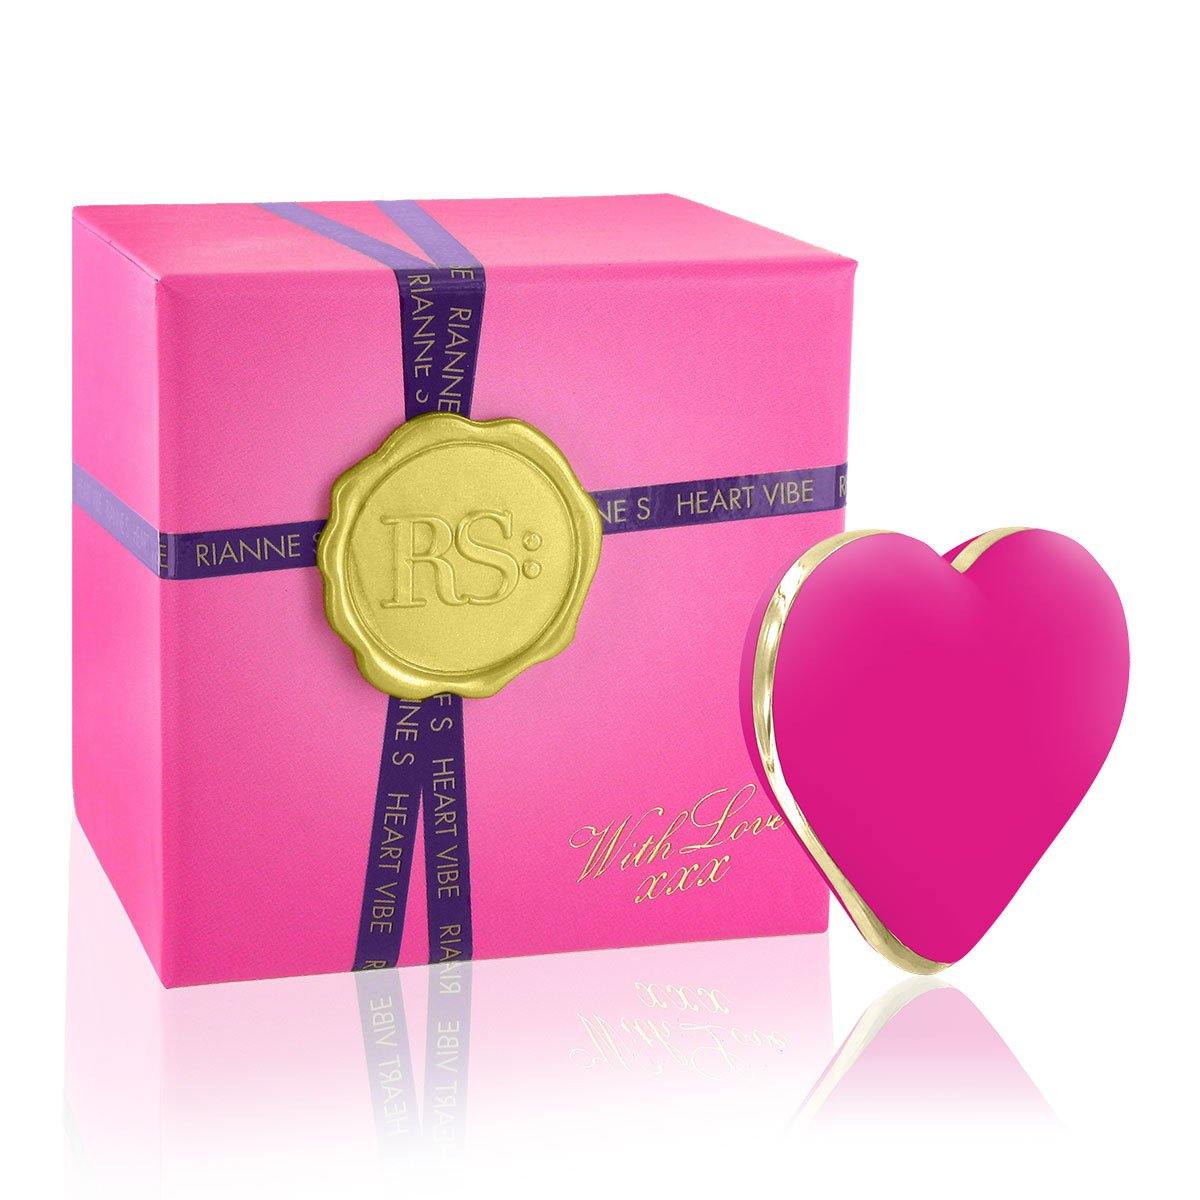 Rianne S Heart Vibe - Buy At Luxury Toy X - Free 3-Day Shipping